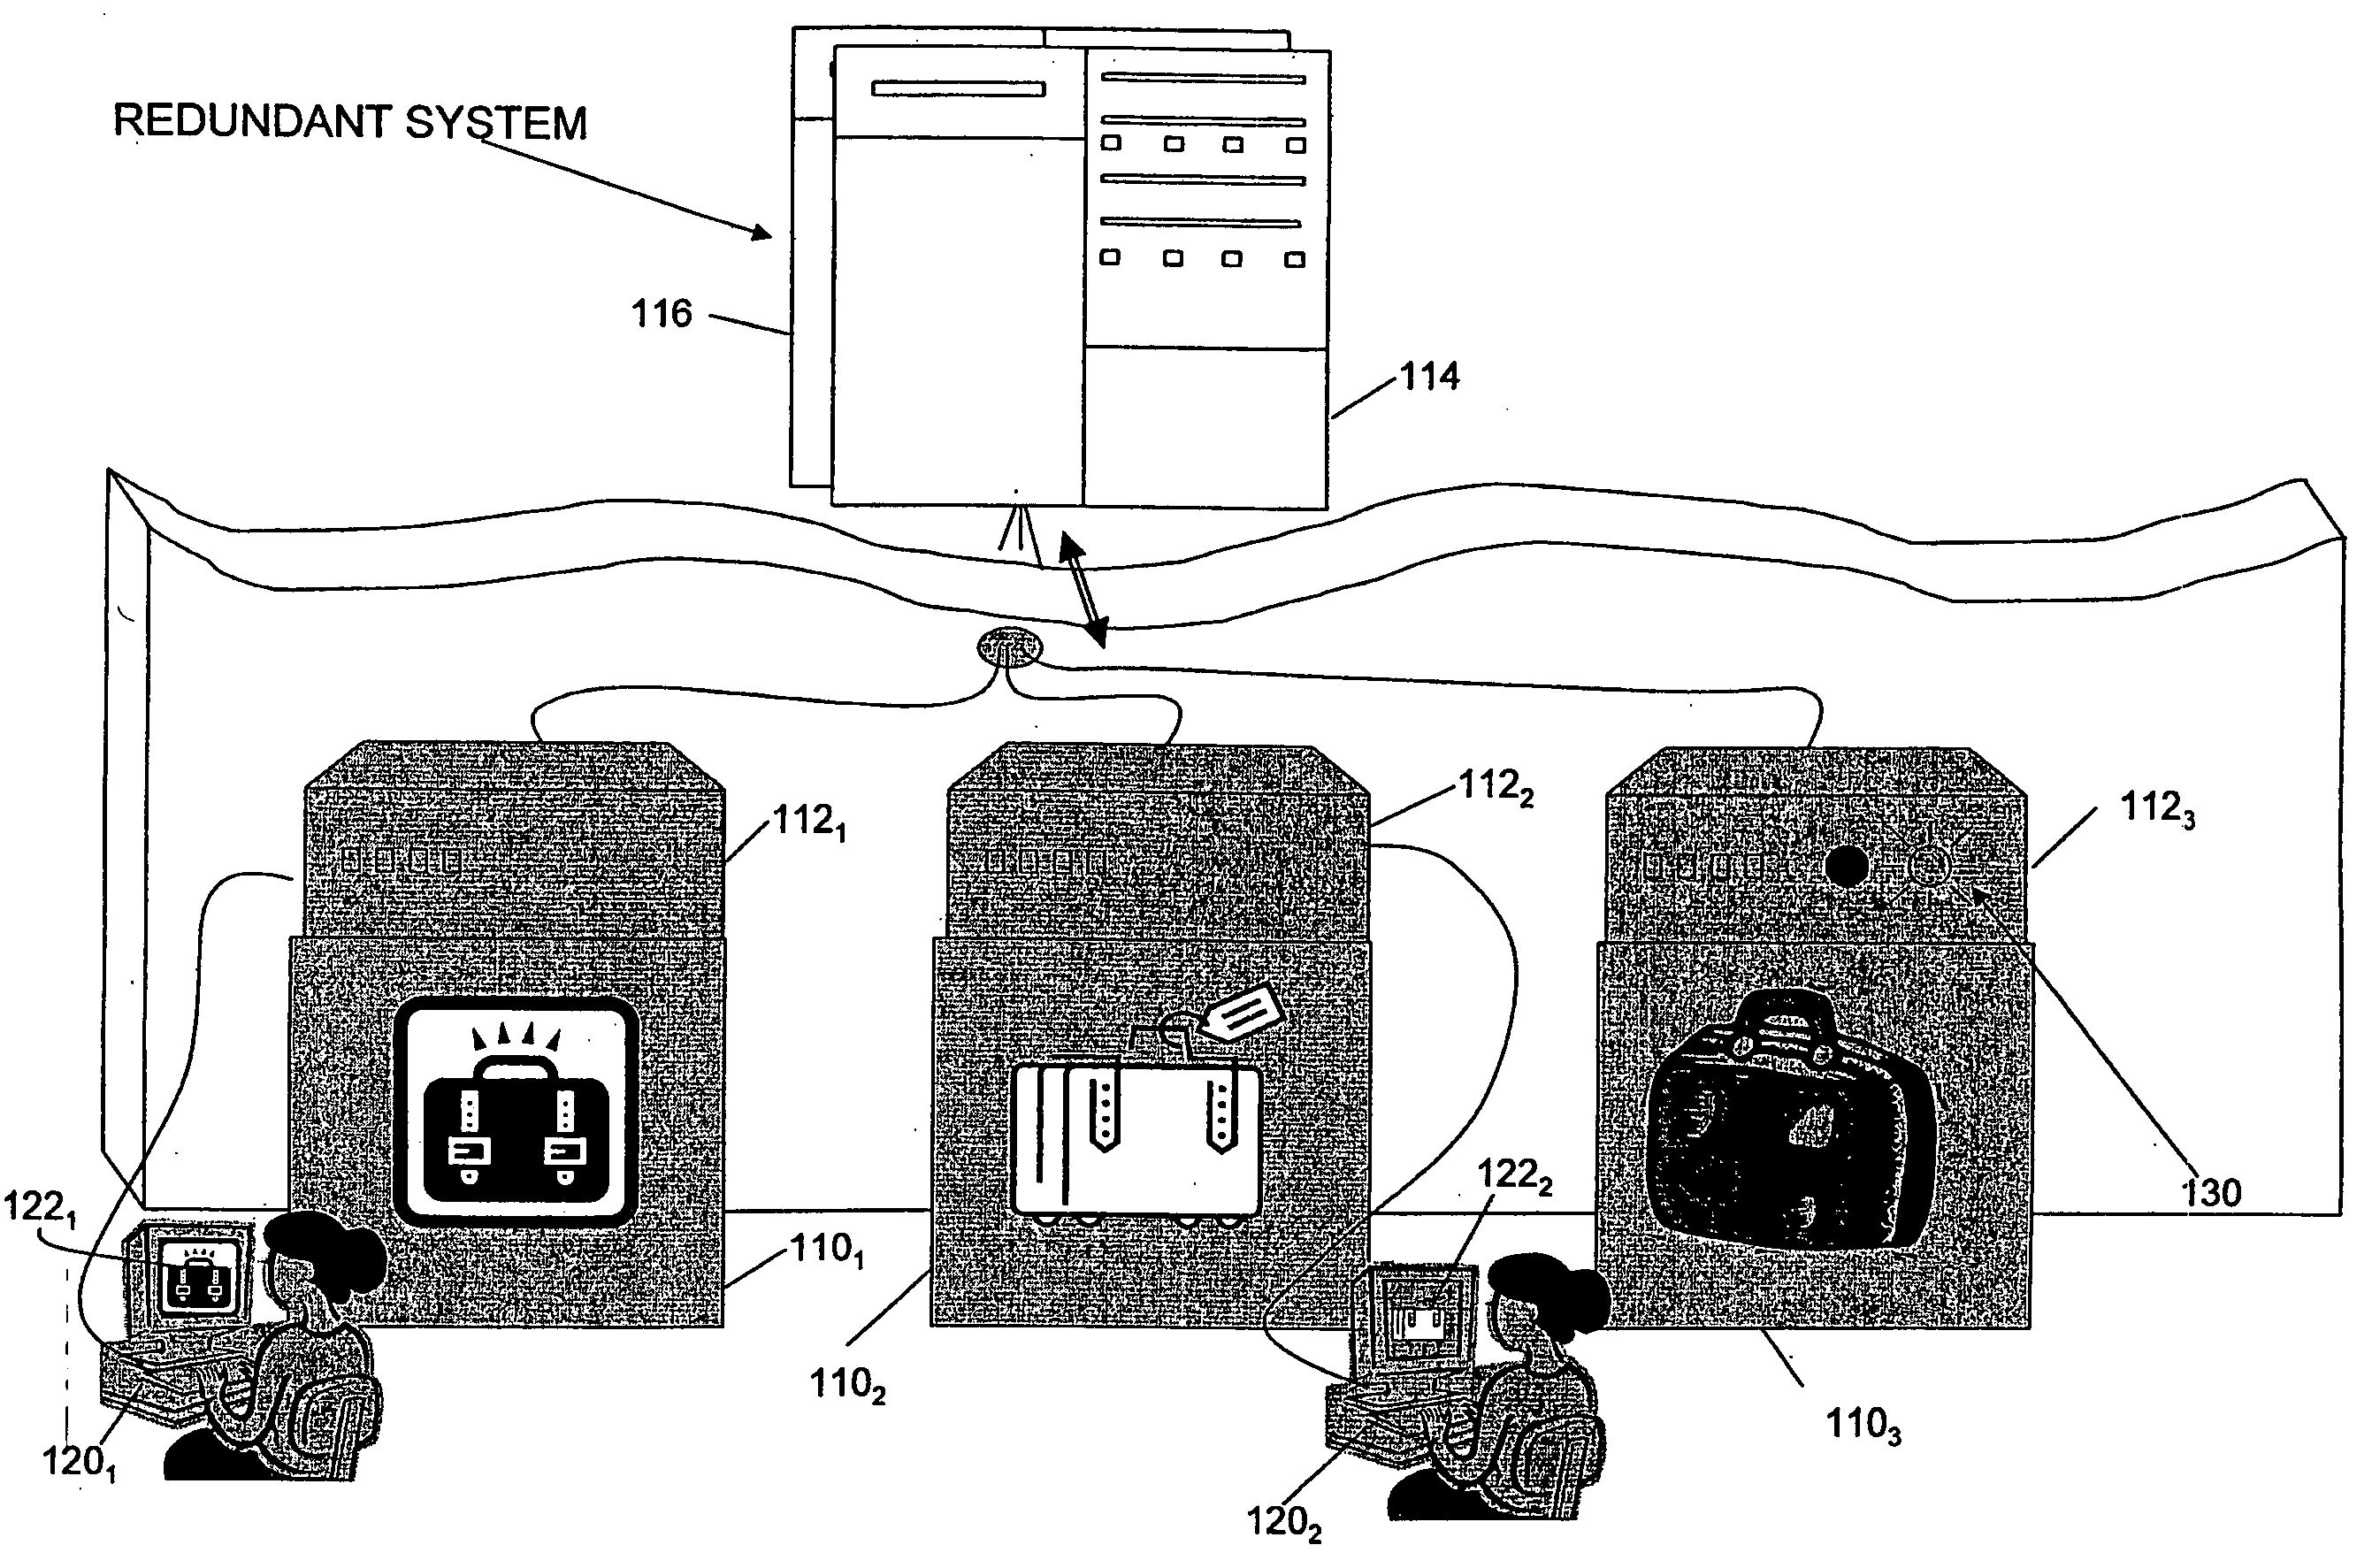 Security system with distributed computing